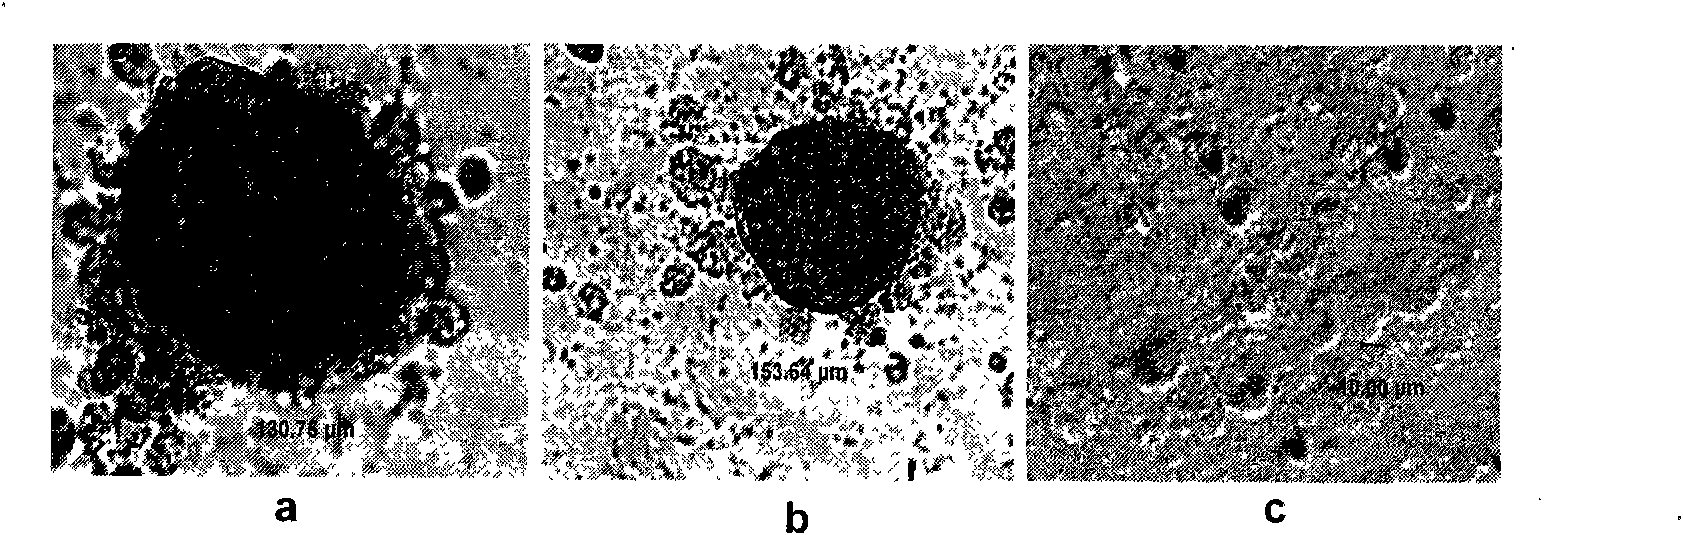 Method for inducing in vitro human medulla mesenchymal stem cells to be divided into islet-like cells